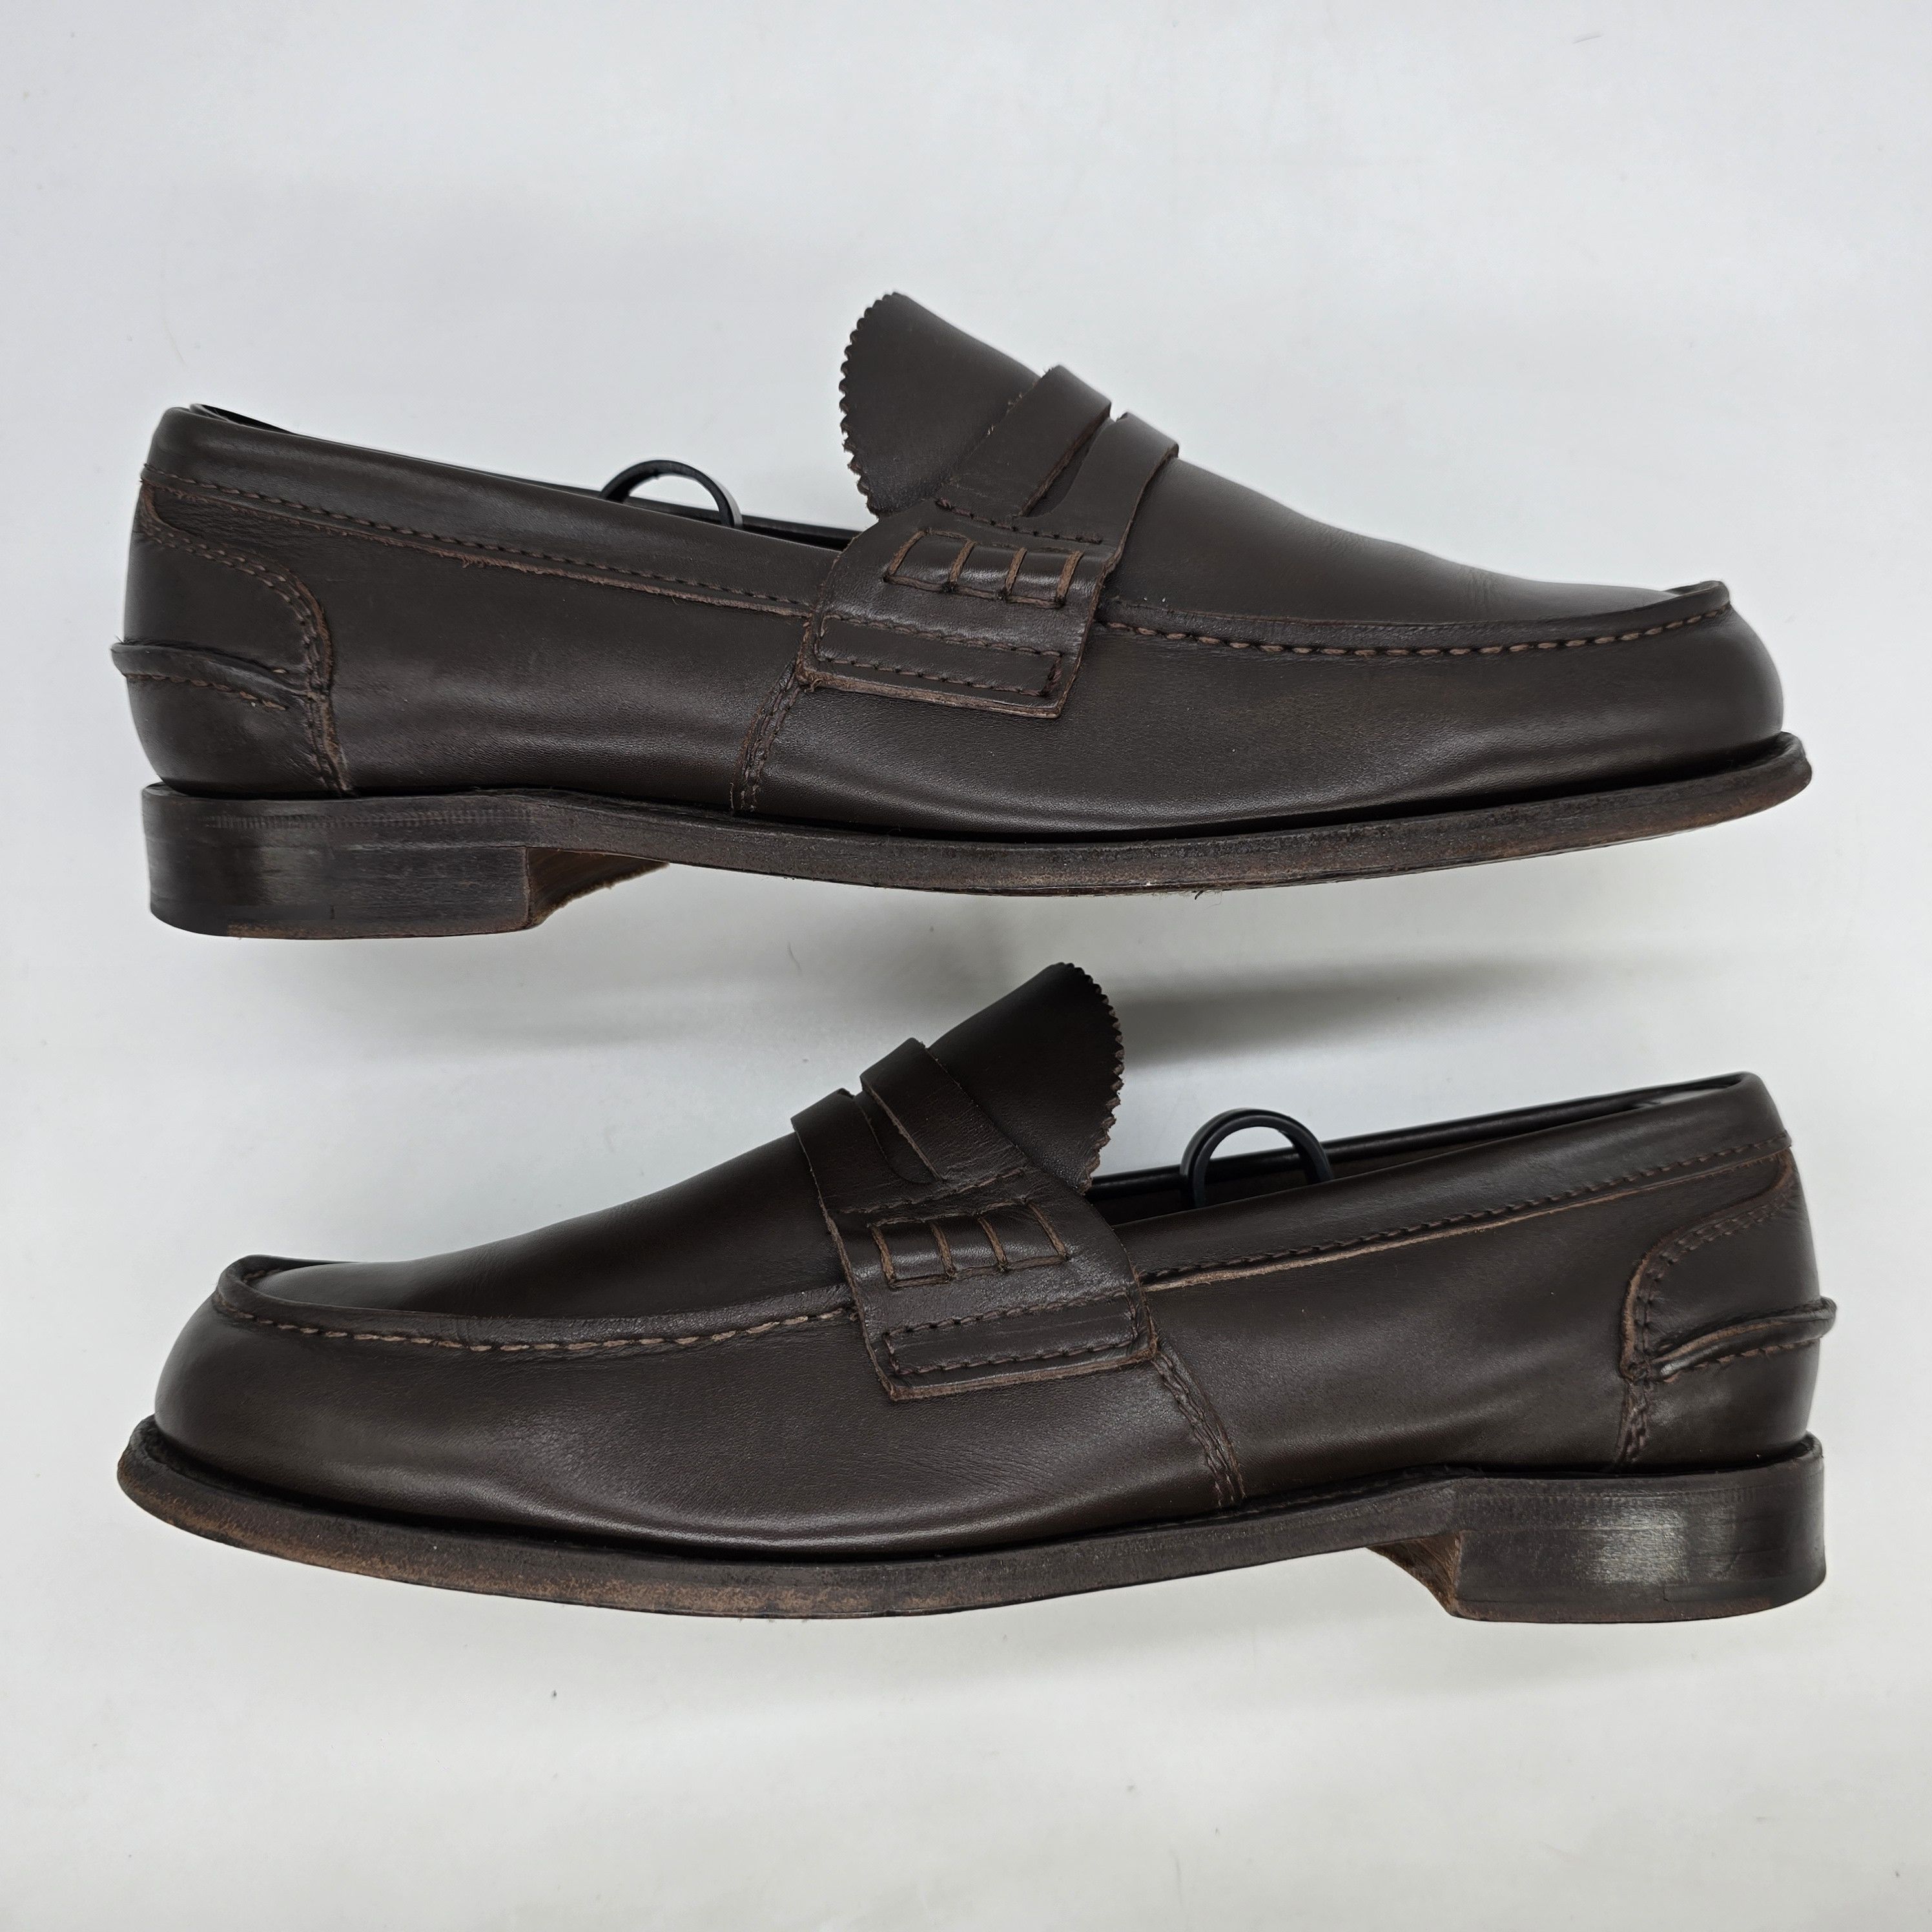 Churchs - Pembrey Leather Loafers - 5